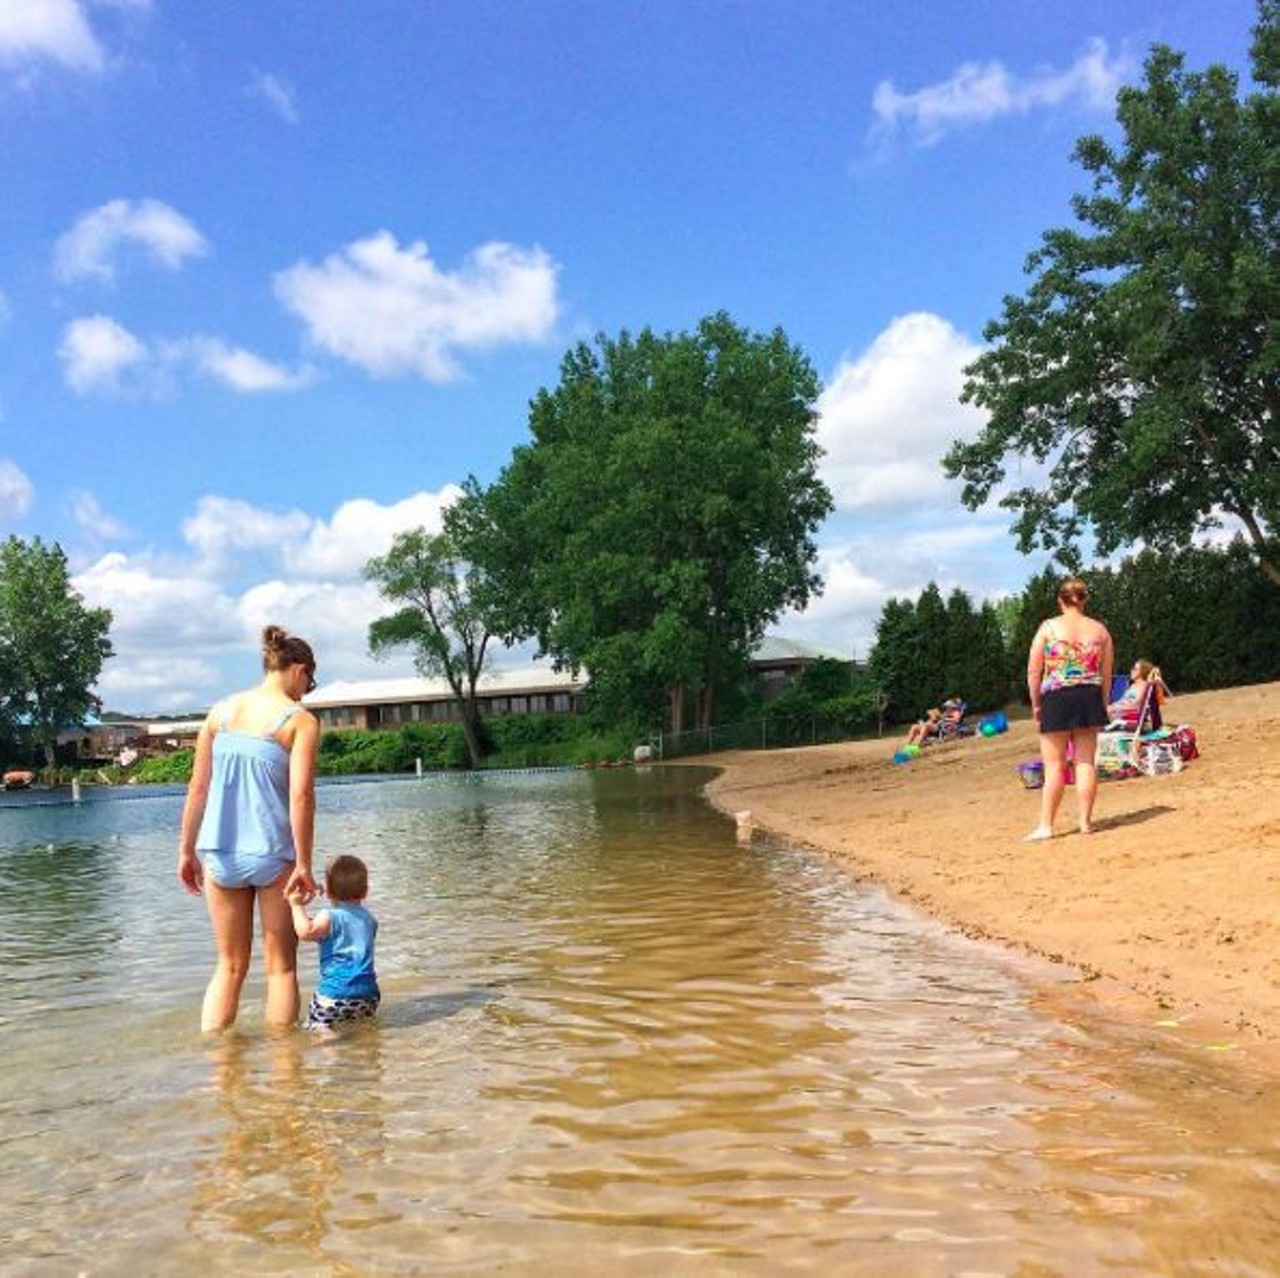 Versluis Park Beach
Grand Rapids; 2 hours, 16 minutes
Once you&#146;ve passed the park&#146;s other attractions, you&#146;ll reach this tranquil destination. Enjoy the views, take a swim, or get your tan on for just $10 per vehicle.
Photo via IG user @grkids